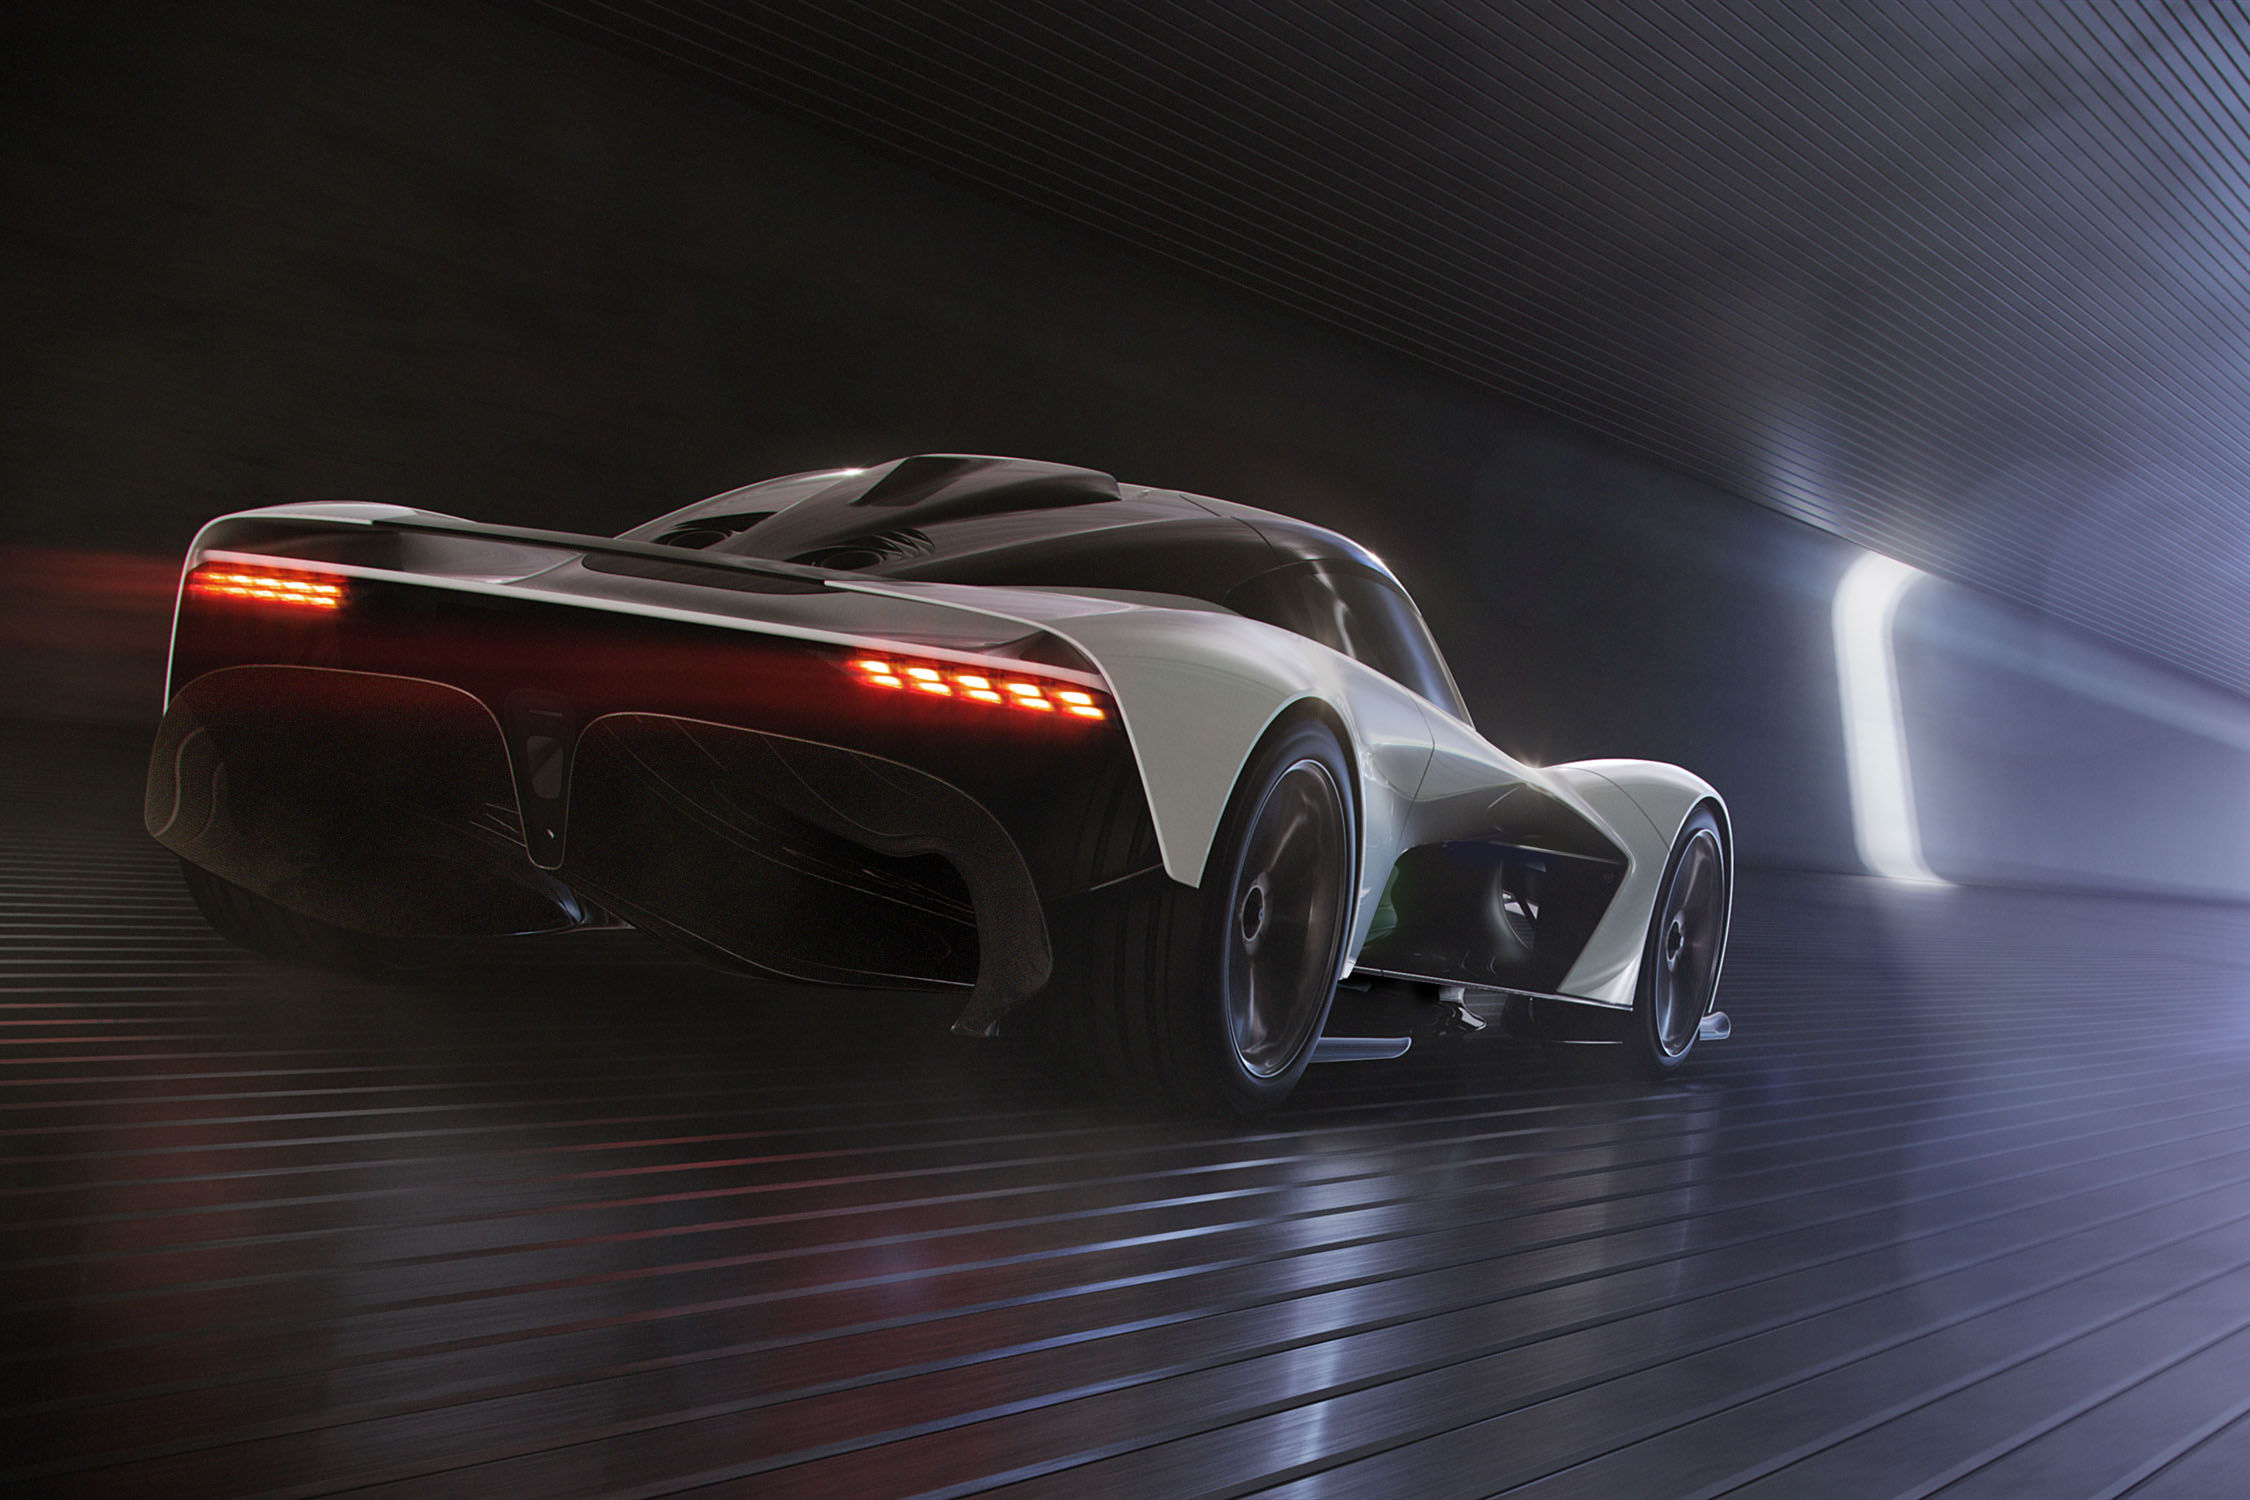 The Future Of Luxury: The Aston Martin AM RB 003 Concept